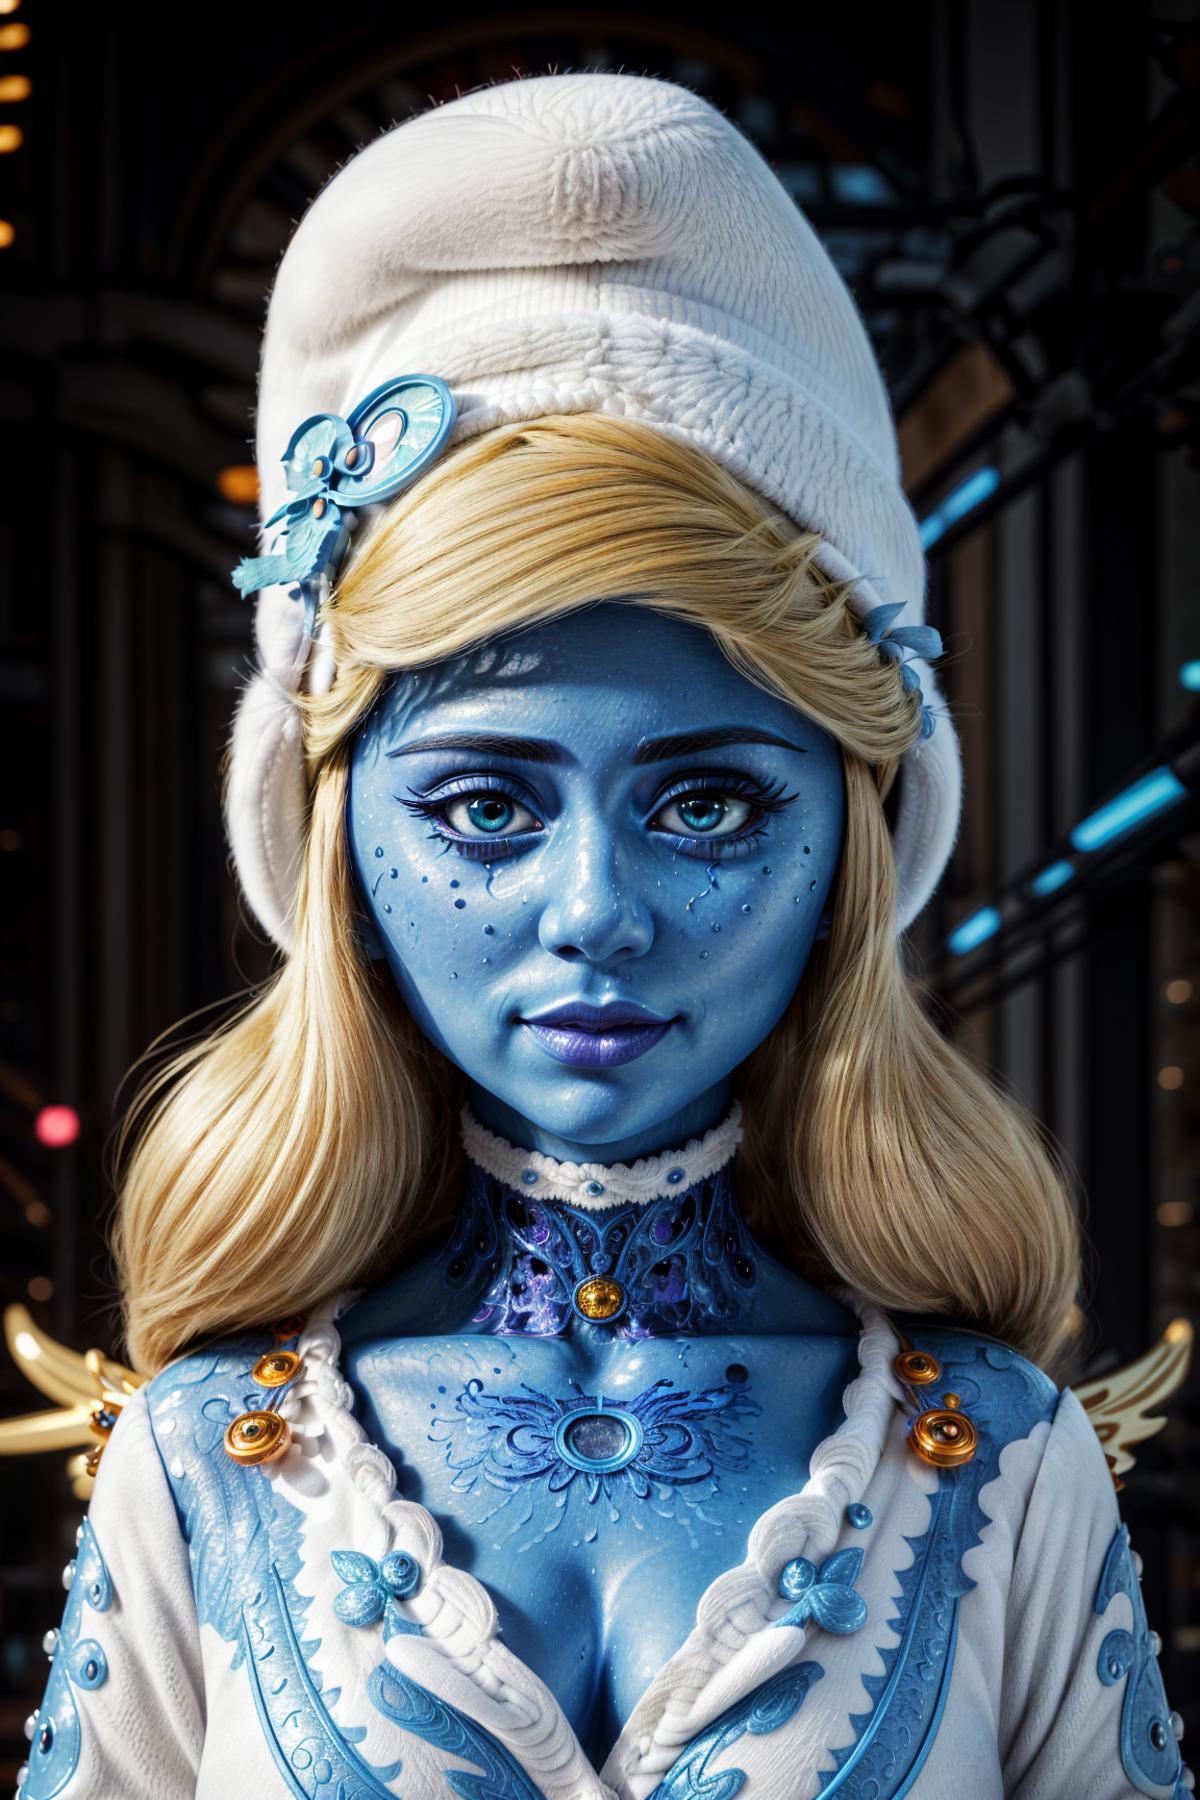 Smurfette [ The Smurfs ] image by robotfromspace